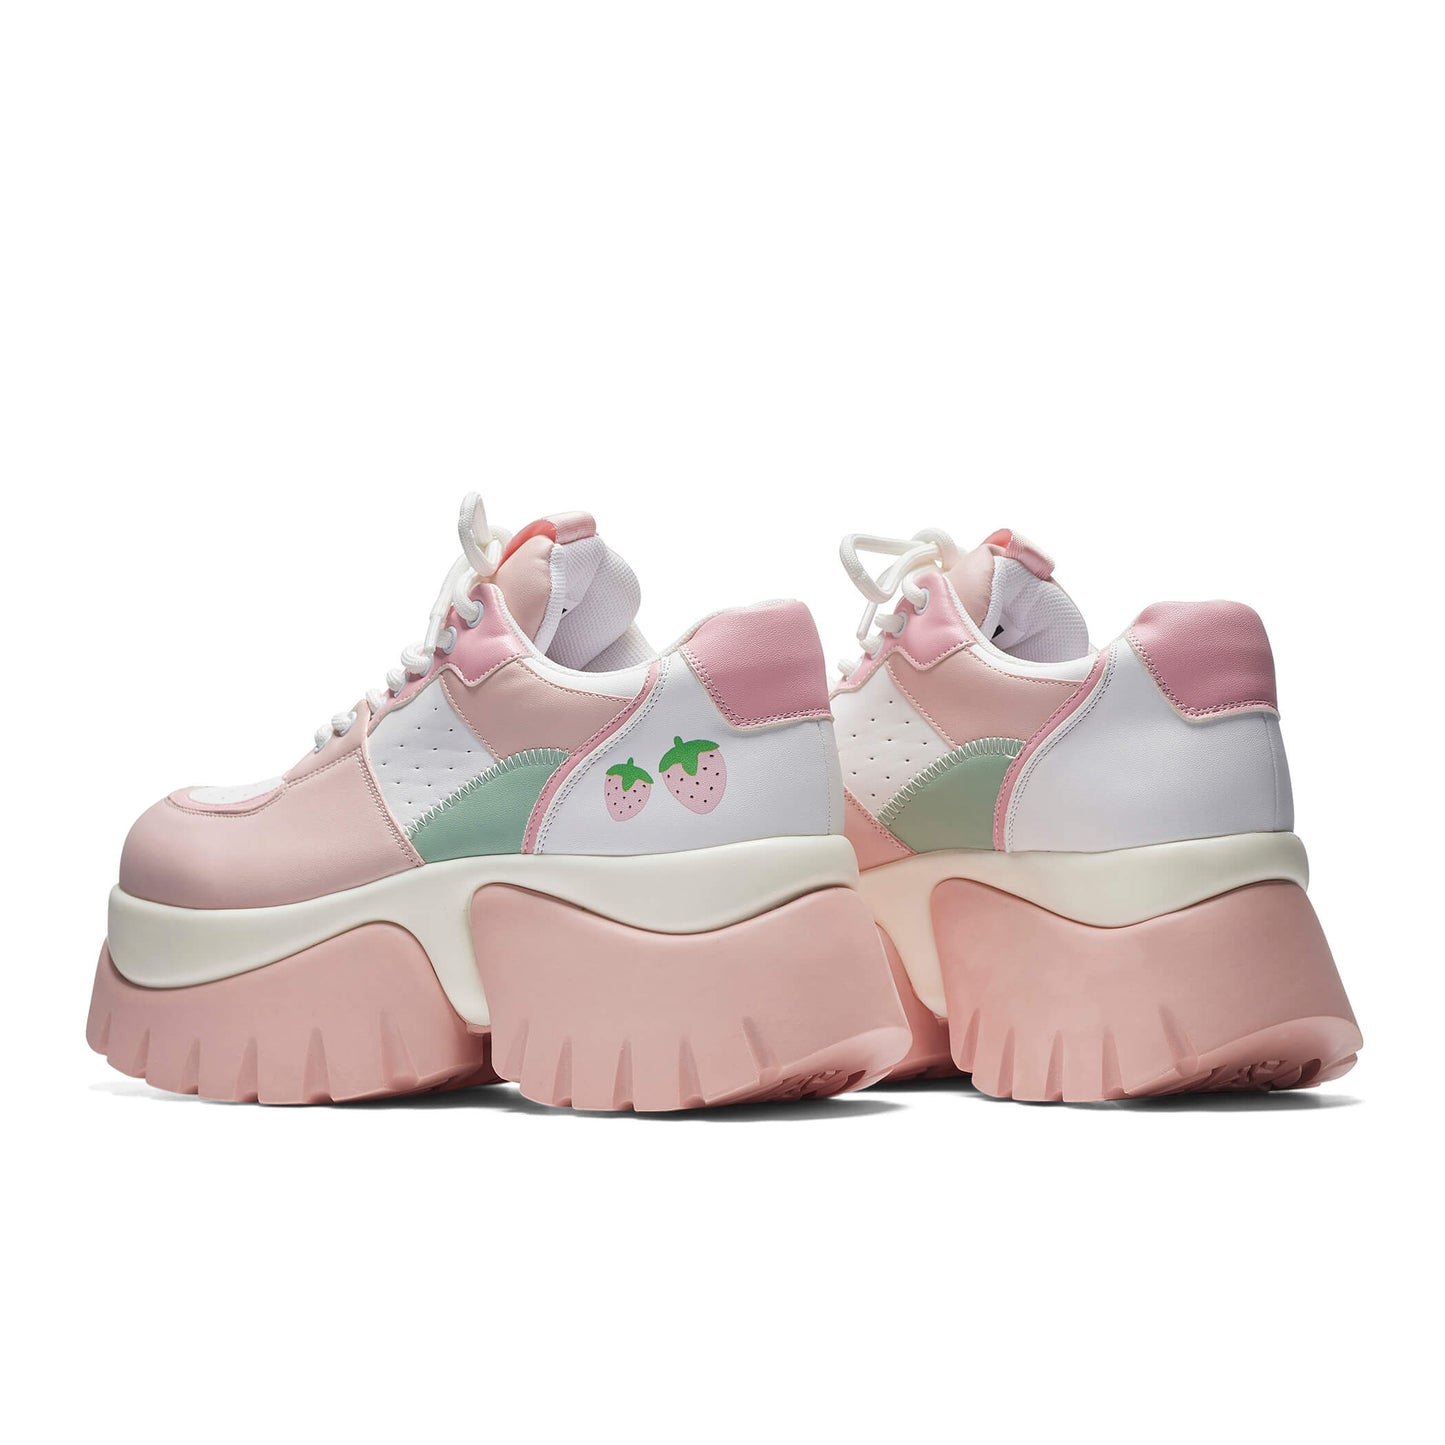 Strawberry Juice Trainers - Trainers - KOI Footwear - Pink - Back View